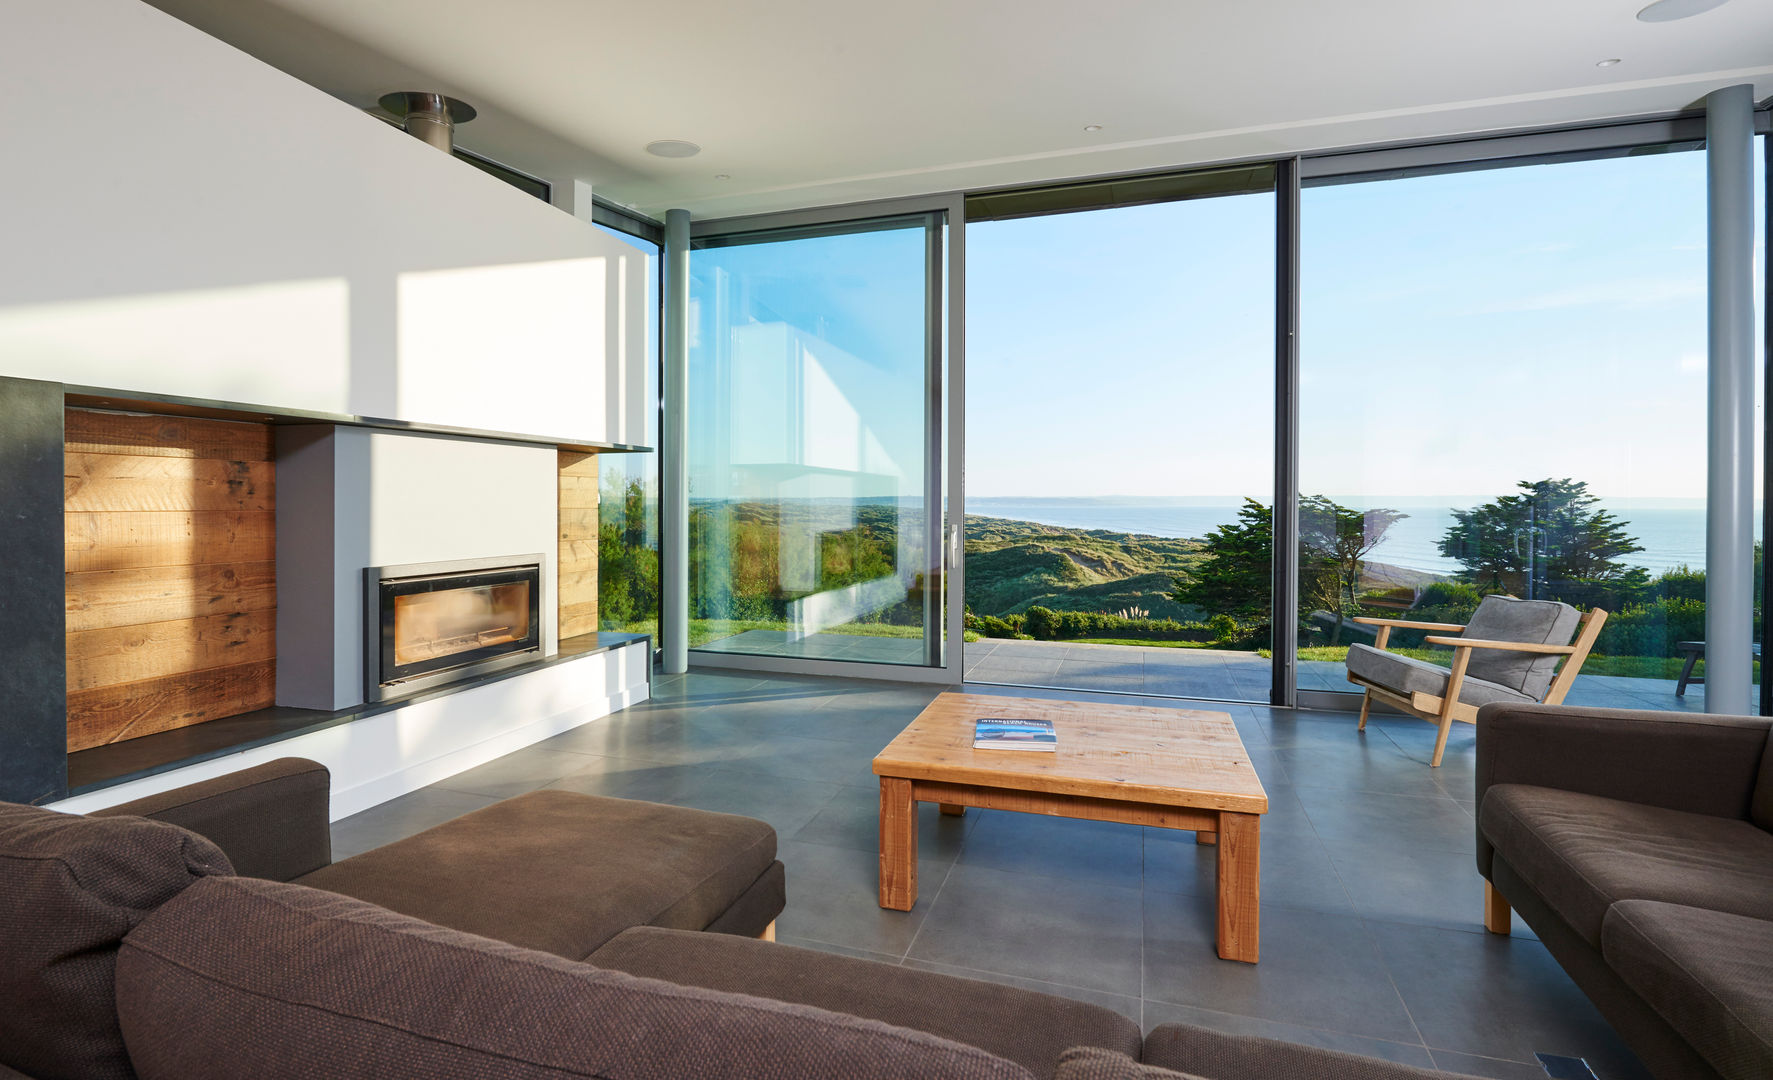 Sandhills Open Plan Living Room with Stunning Views Barc Architects Modern living room